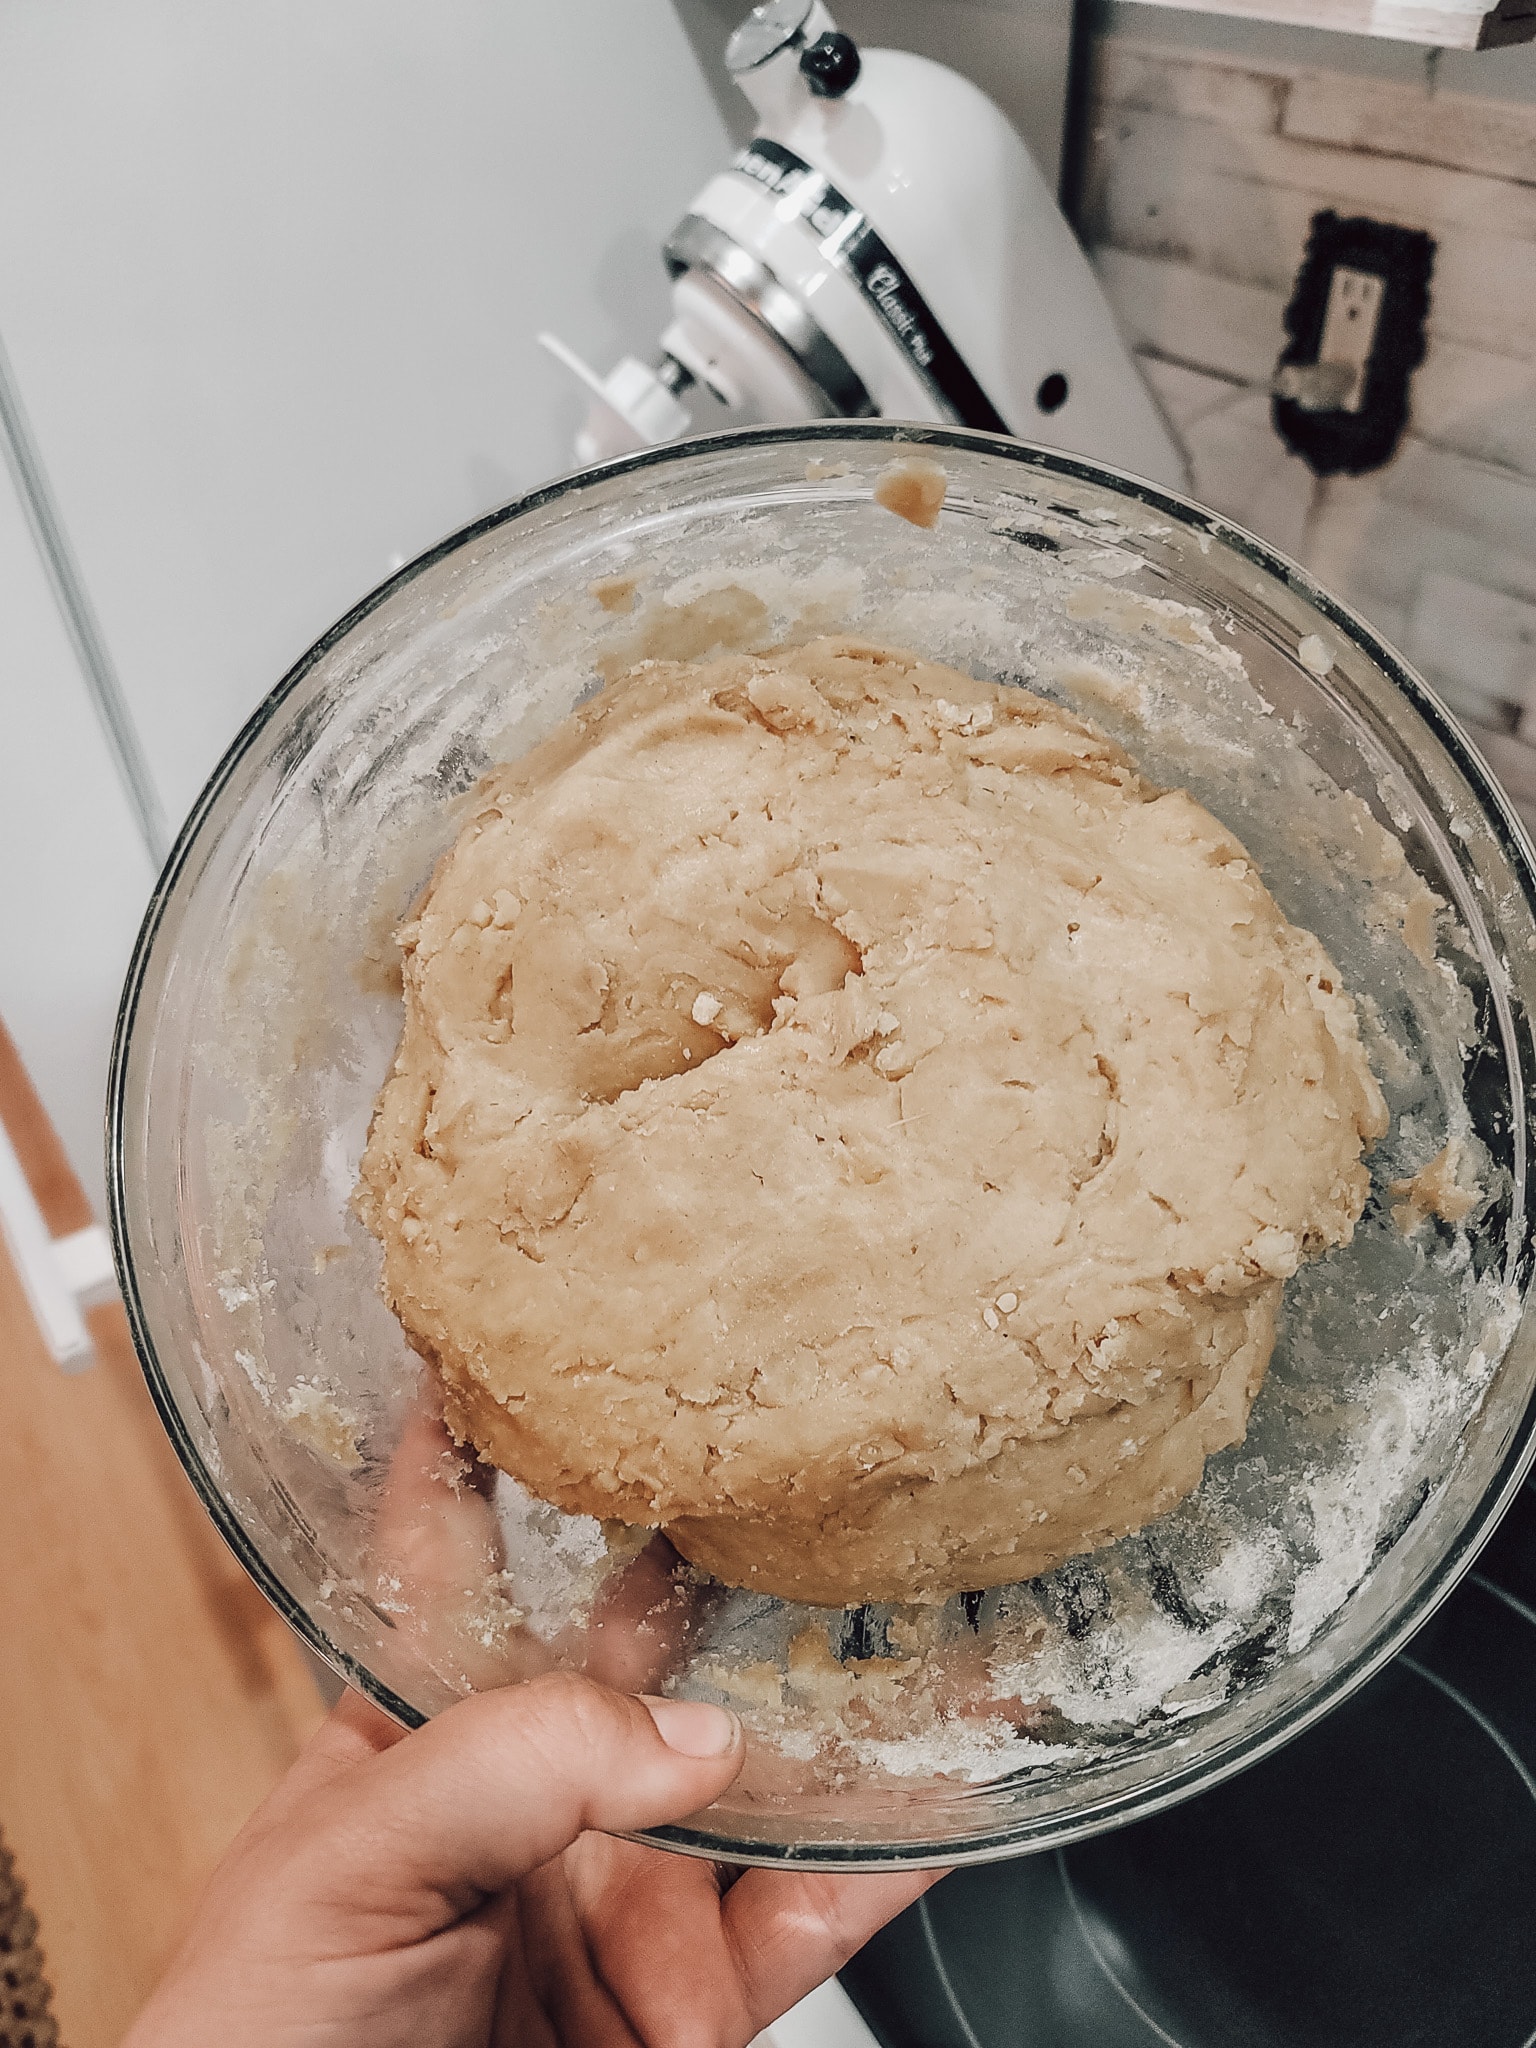 Place the dough in a glass bowl and cover the dough with plastic wrap. Allow it to rest in a warm place overnight or for up to 24 hours.  Einkorn Cinnamon Rolls. 